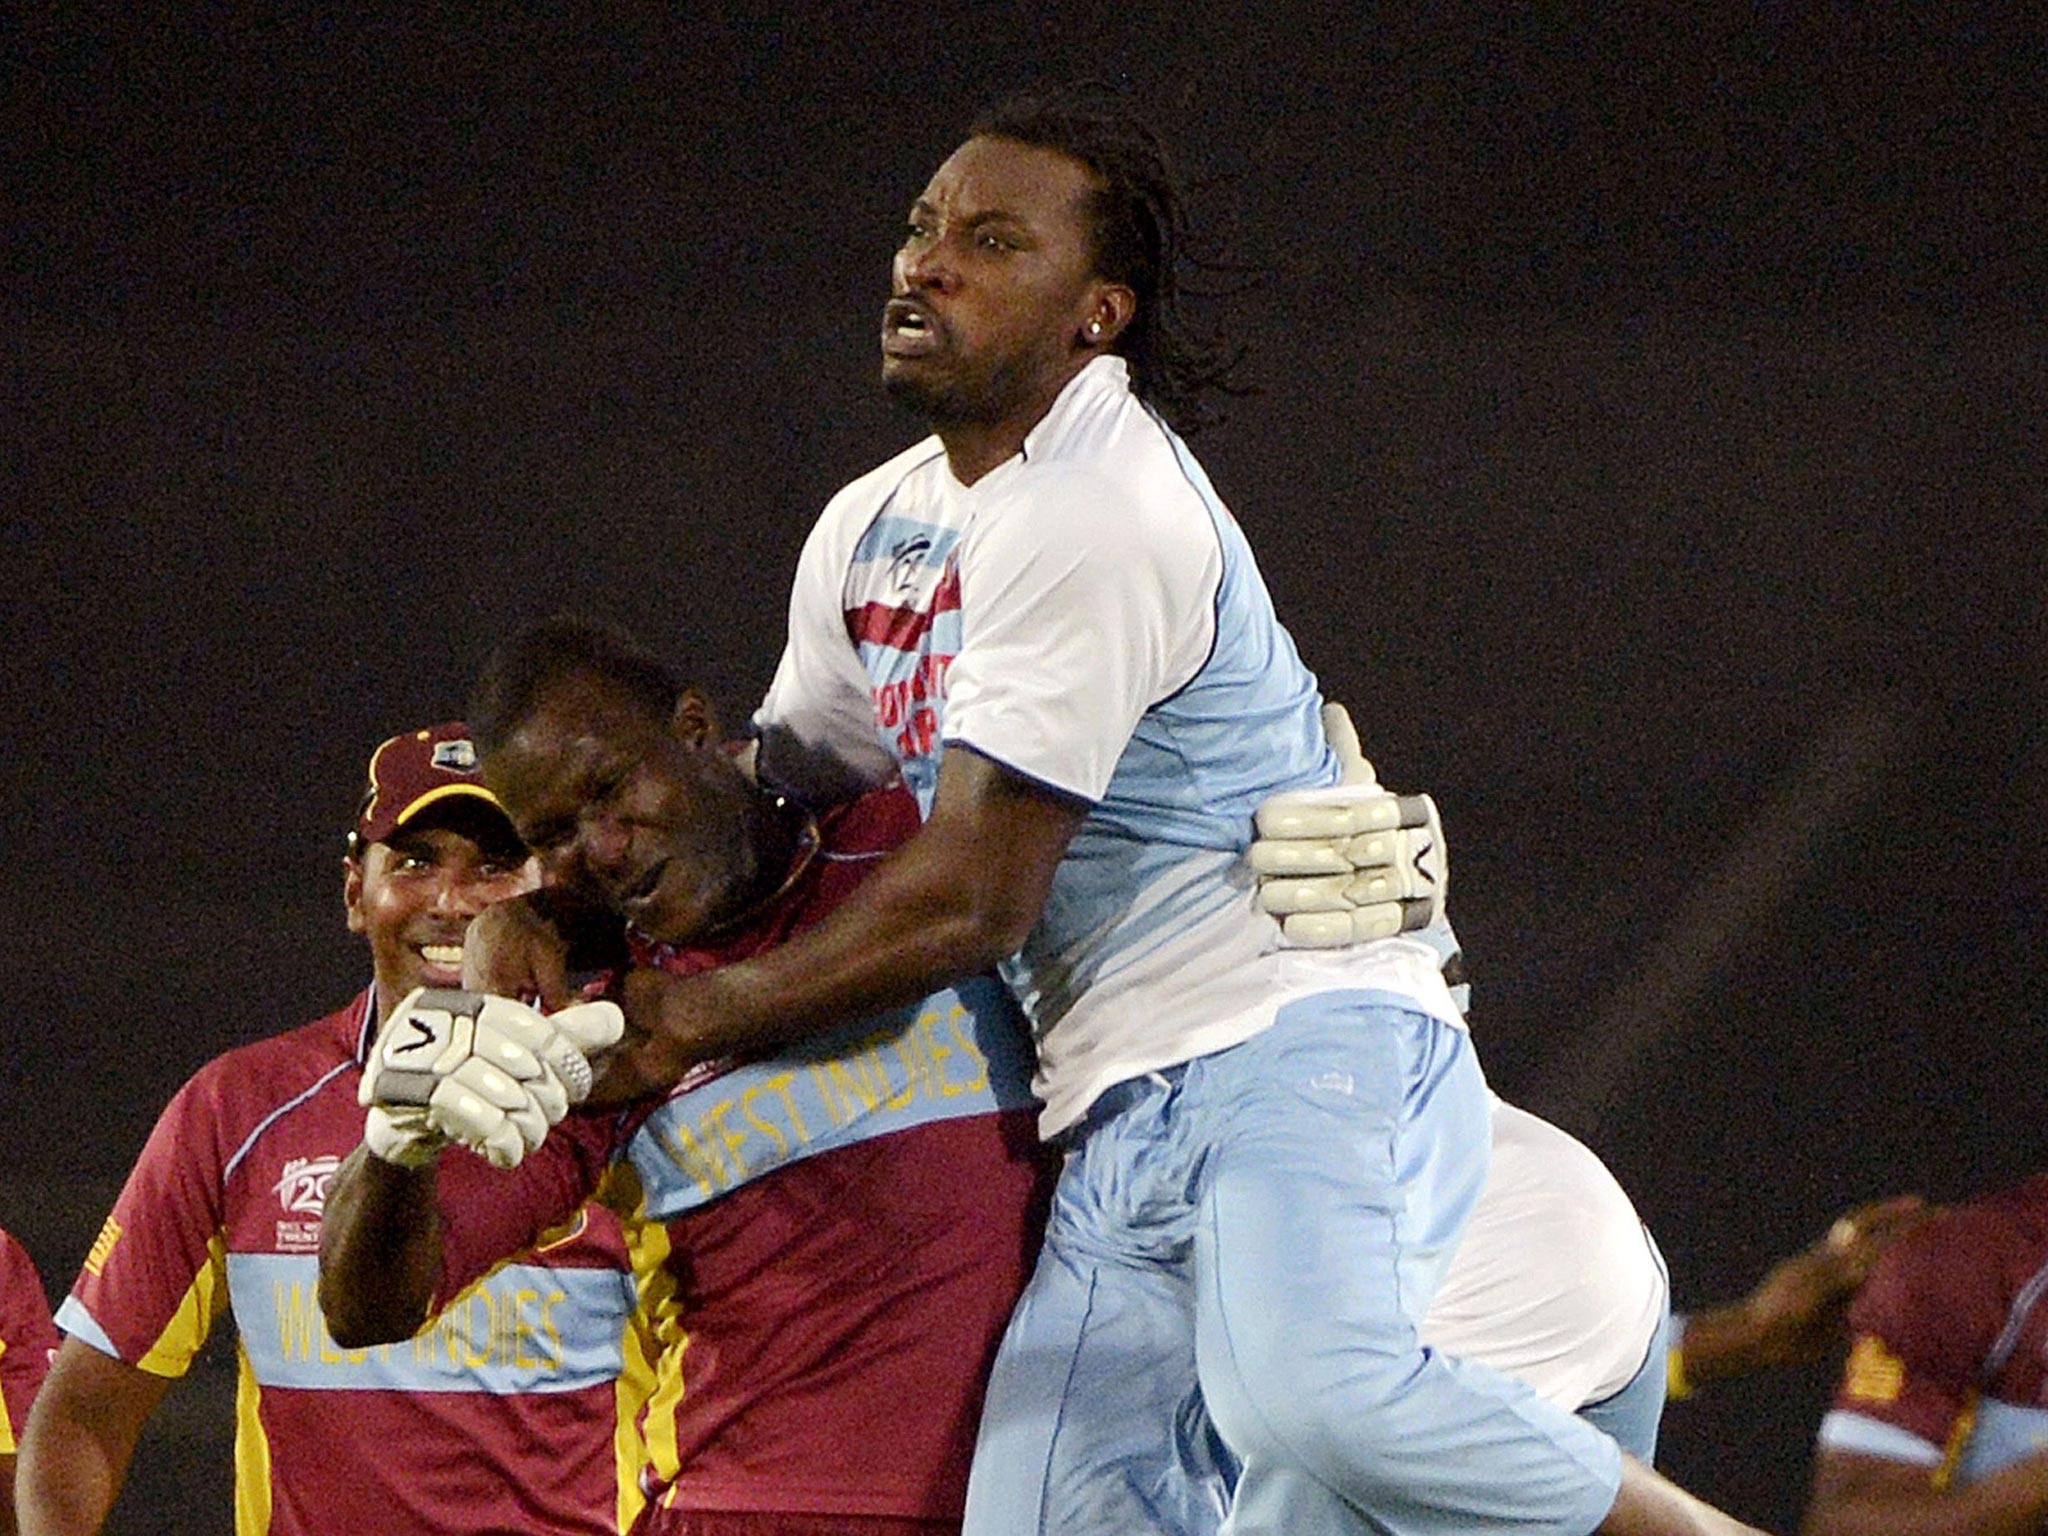 Chris Gayle leaps on top of Darren Sammy after running on to the pitch to celebrate West Indies’ win over Australia